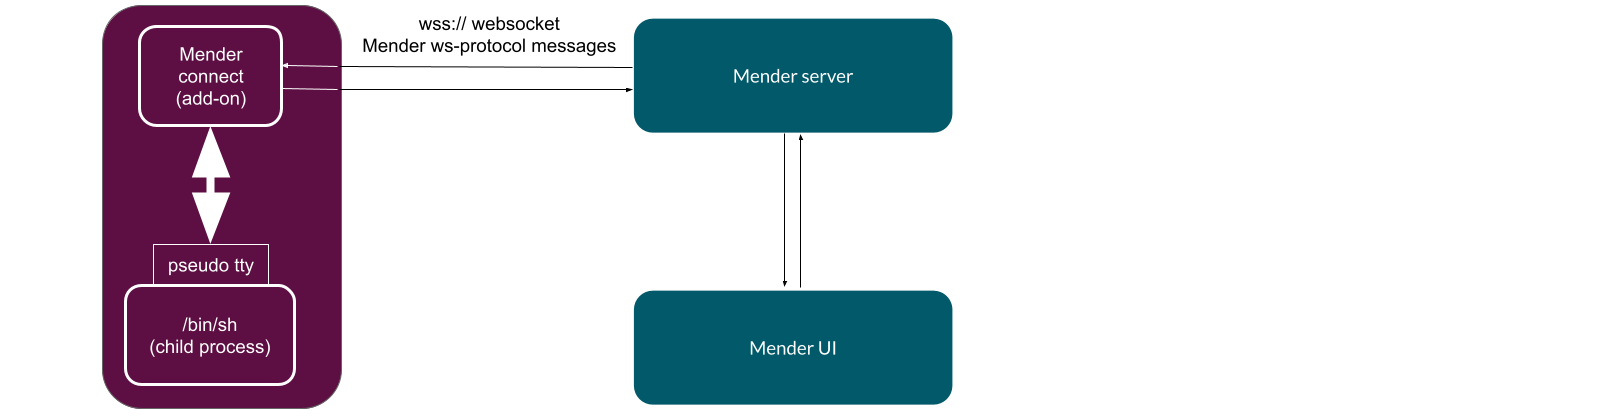 mender-connect-and-ws